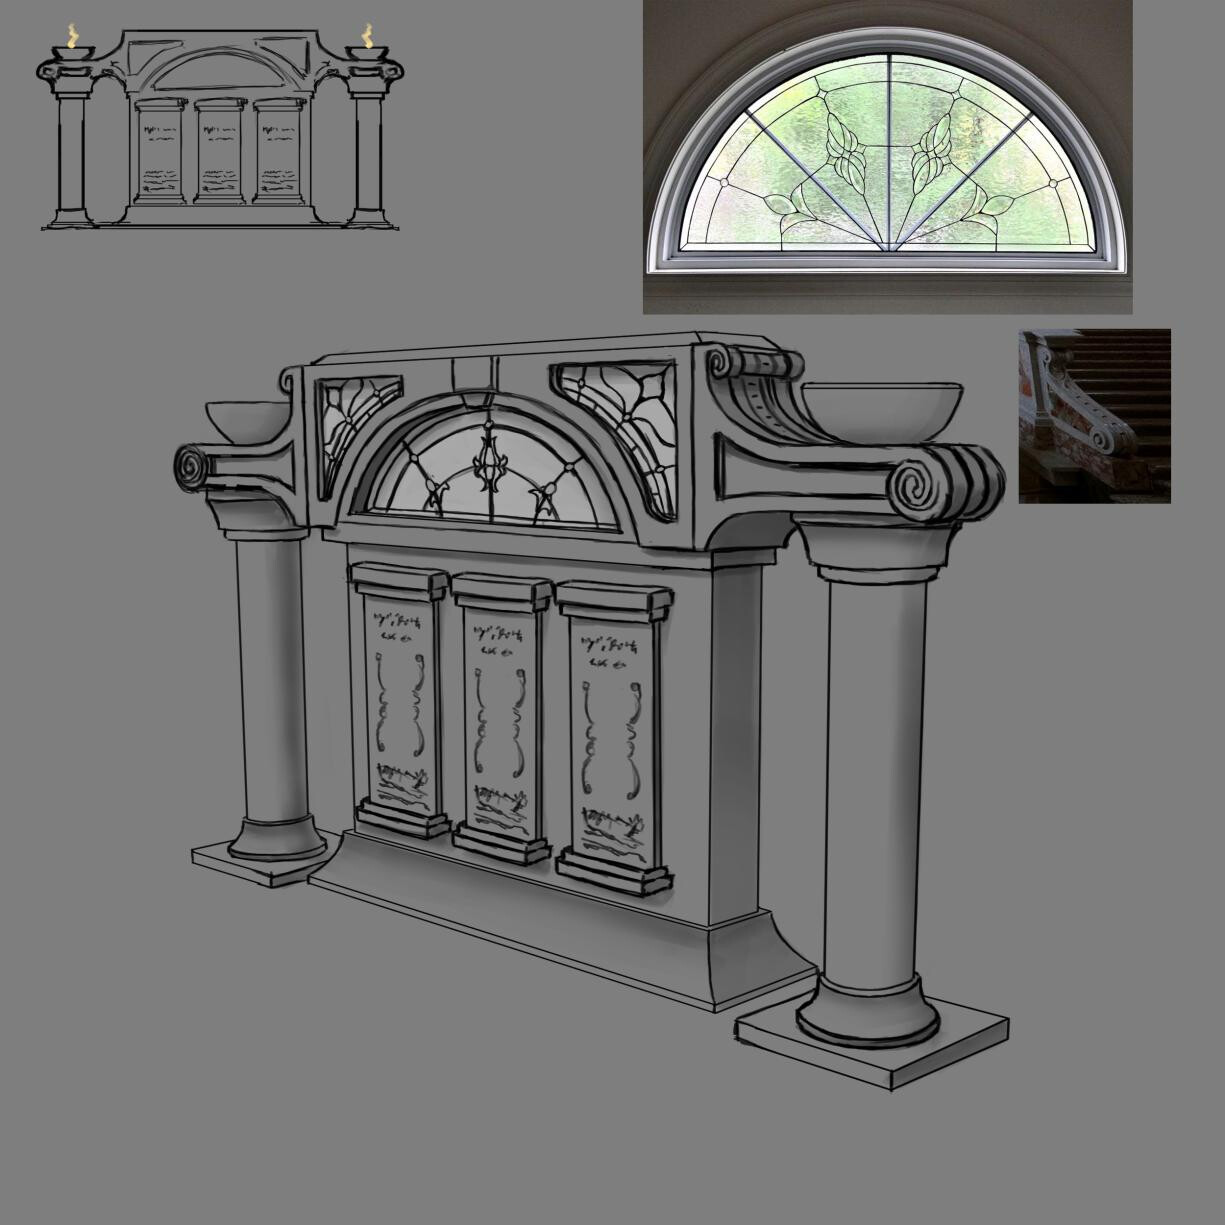 Concept for the coffins, Idea pitched to Danny and Theory was that this is where all the ancient queens are entombed. 